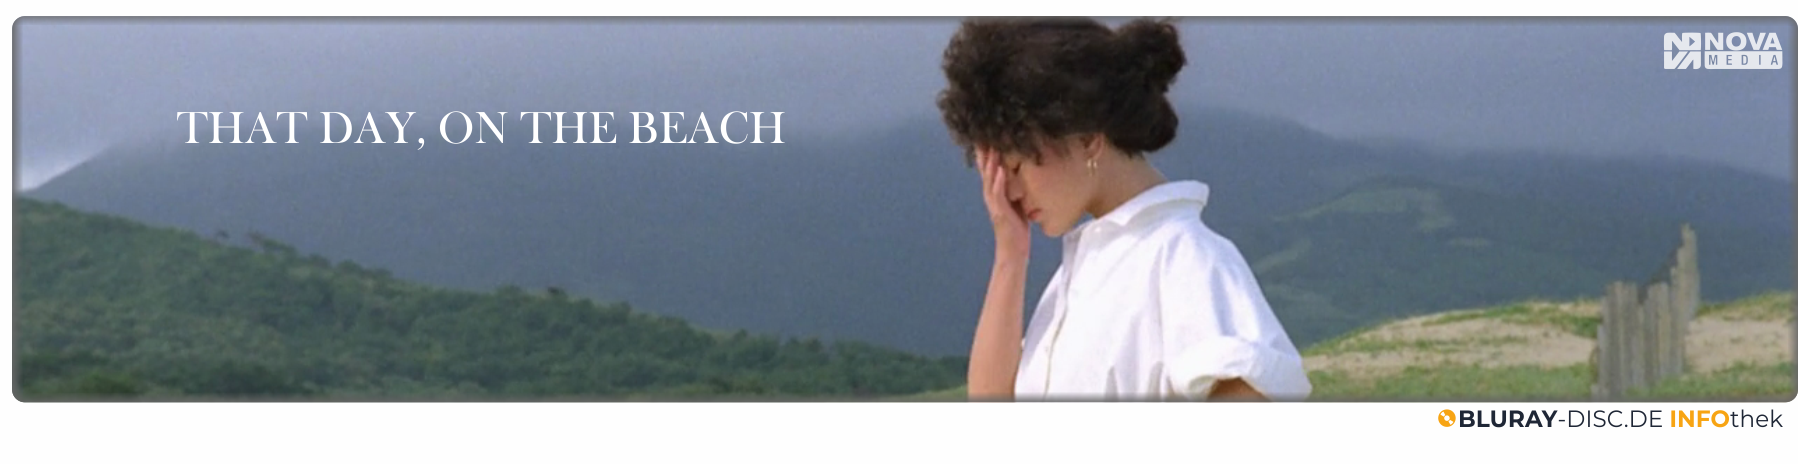 Moviebanner_NovaMedia_That_Day_on_the_Beach.png